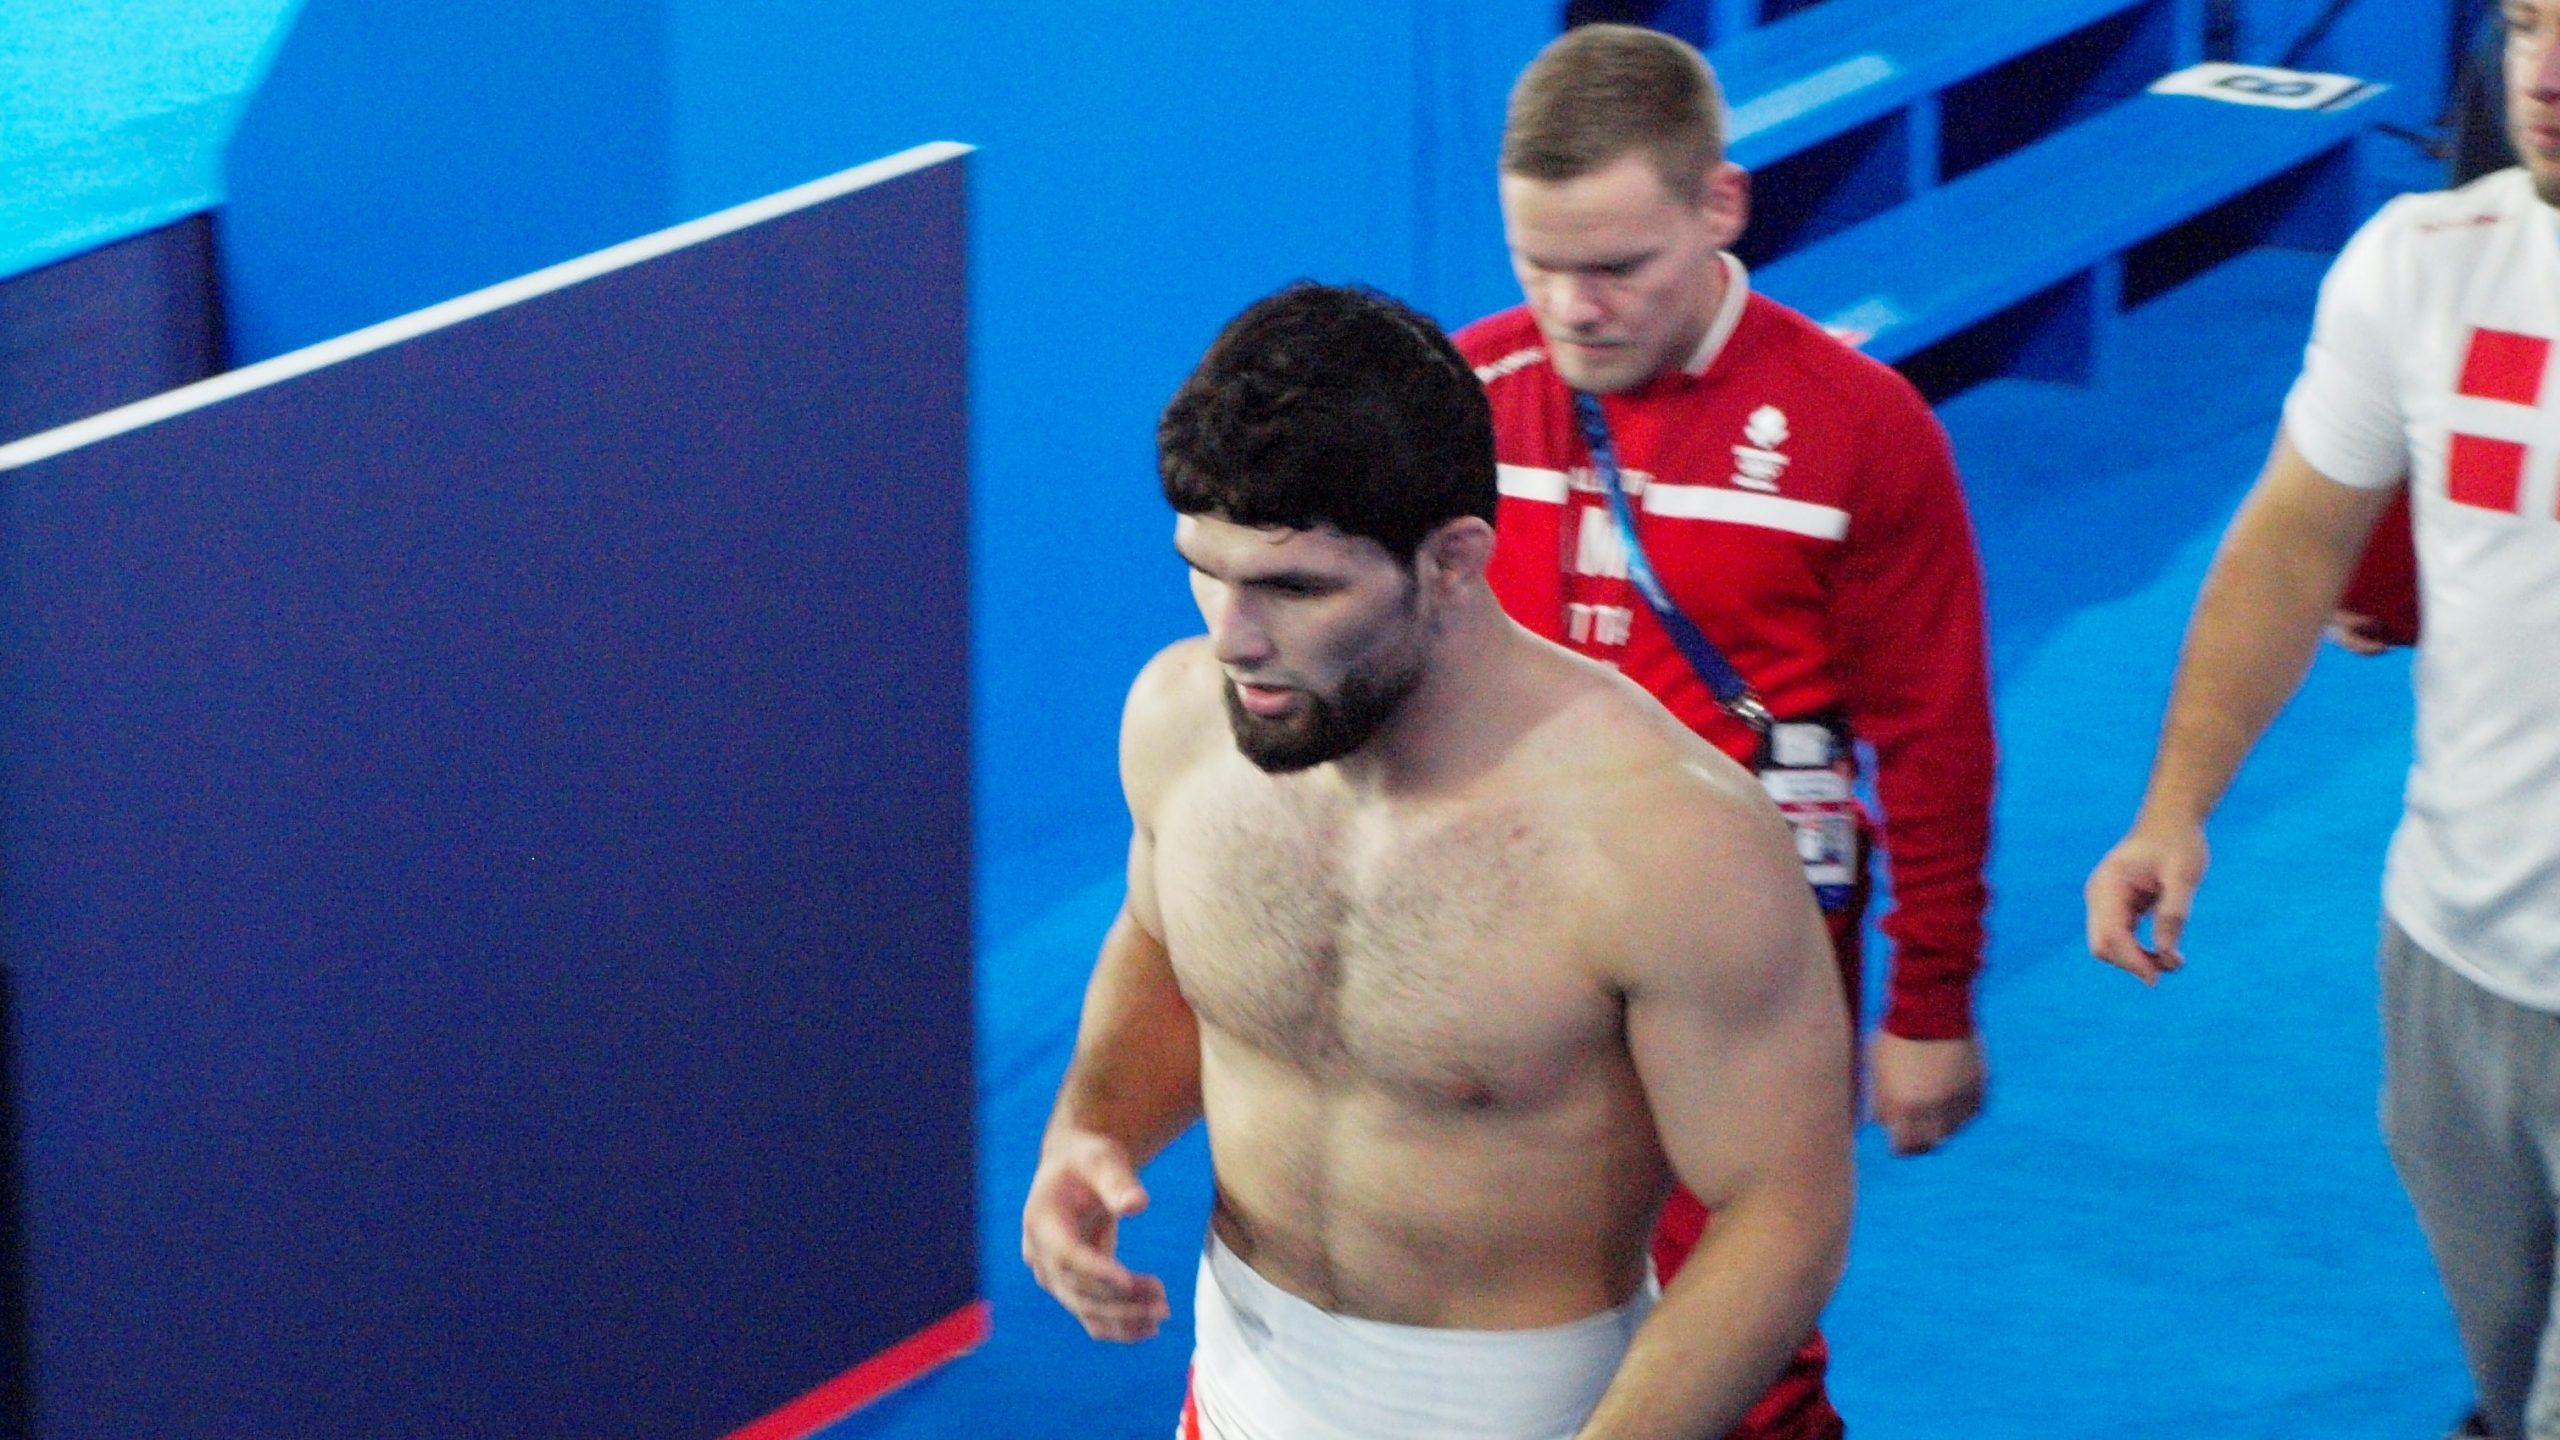 Turpal Bisultanov wrestles his way to European Championship gold for Denmark